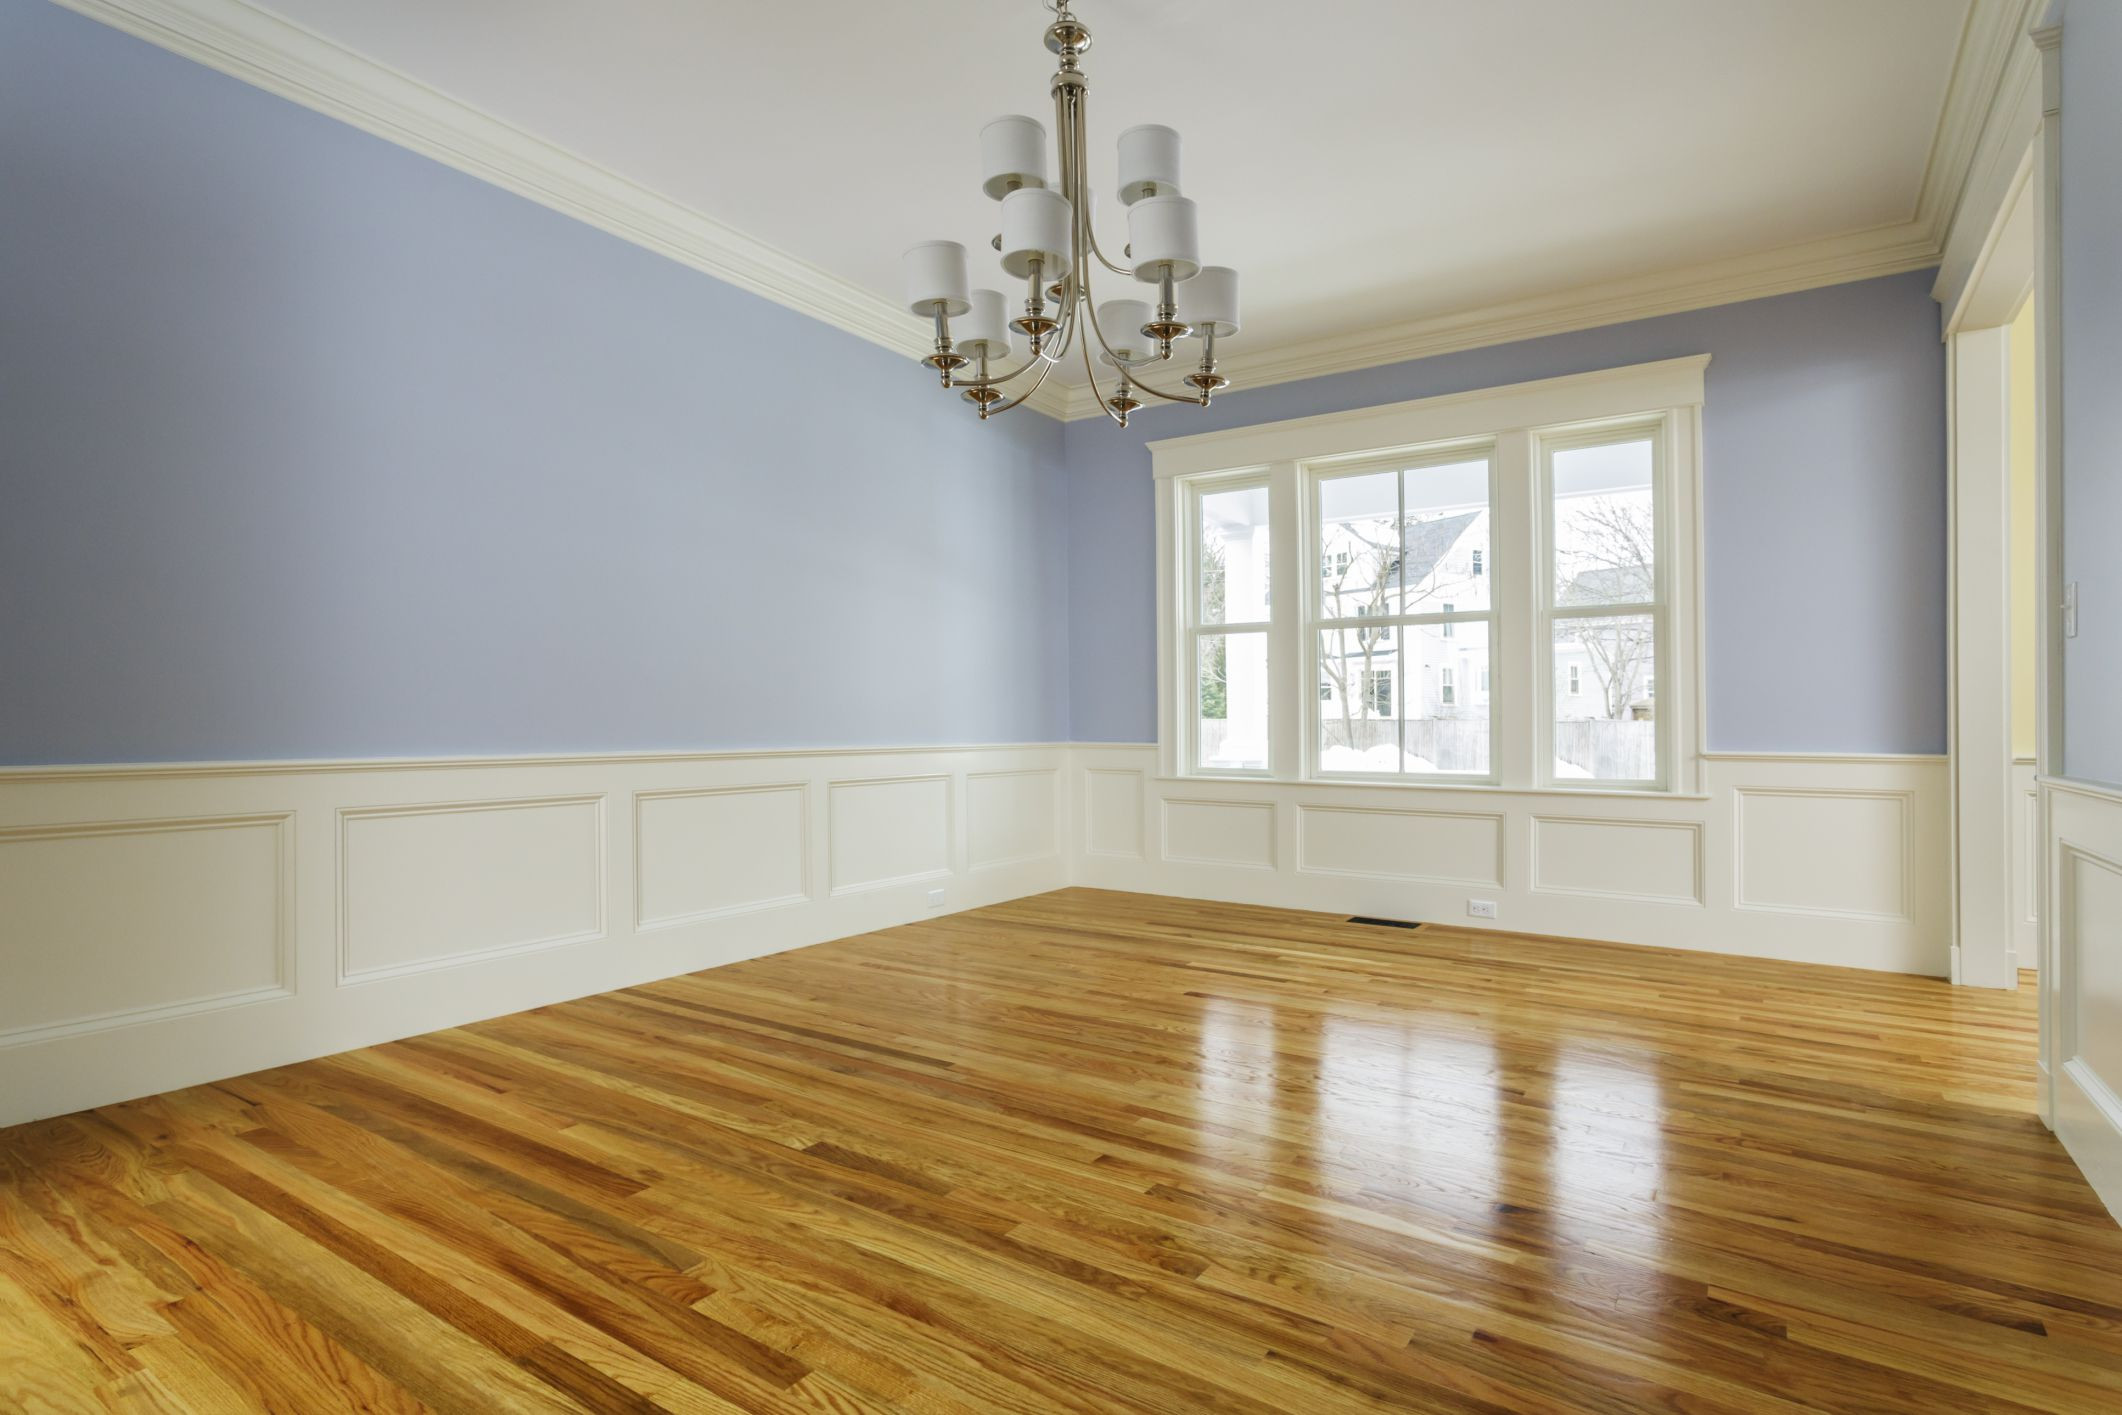 21 Famous Hardwood Floor Cleaning Companies 2024 free download hardwood floor cleaning companies of how to make hardwood floors shiny with regard to 168686572 56a4e87c3df78cf7728544a2